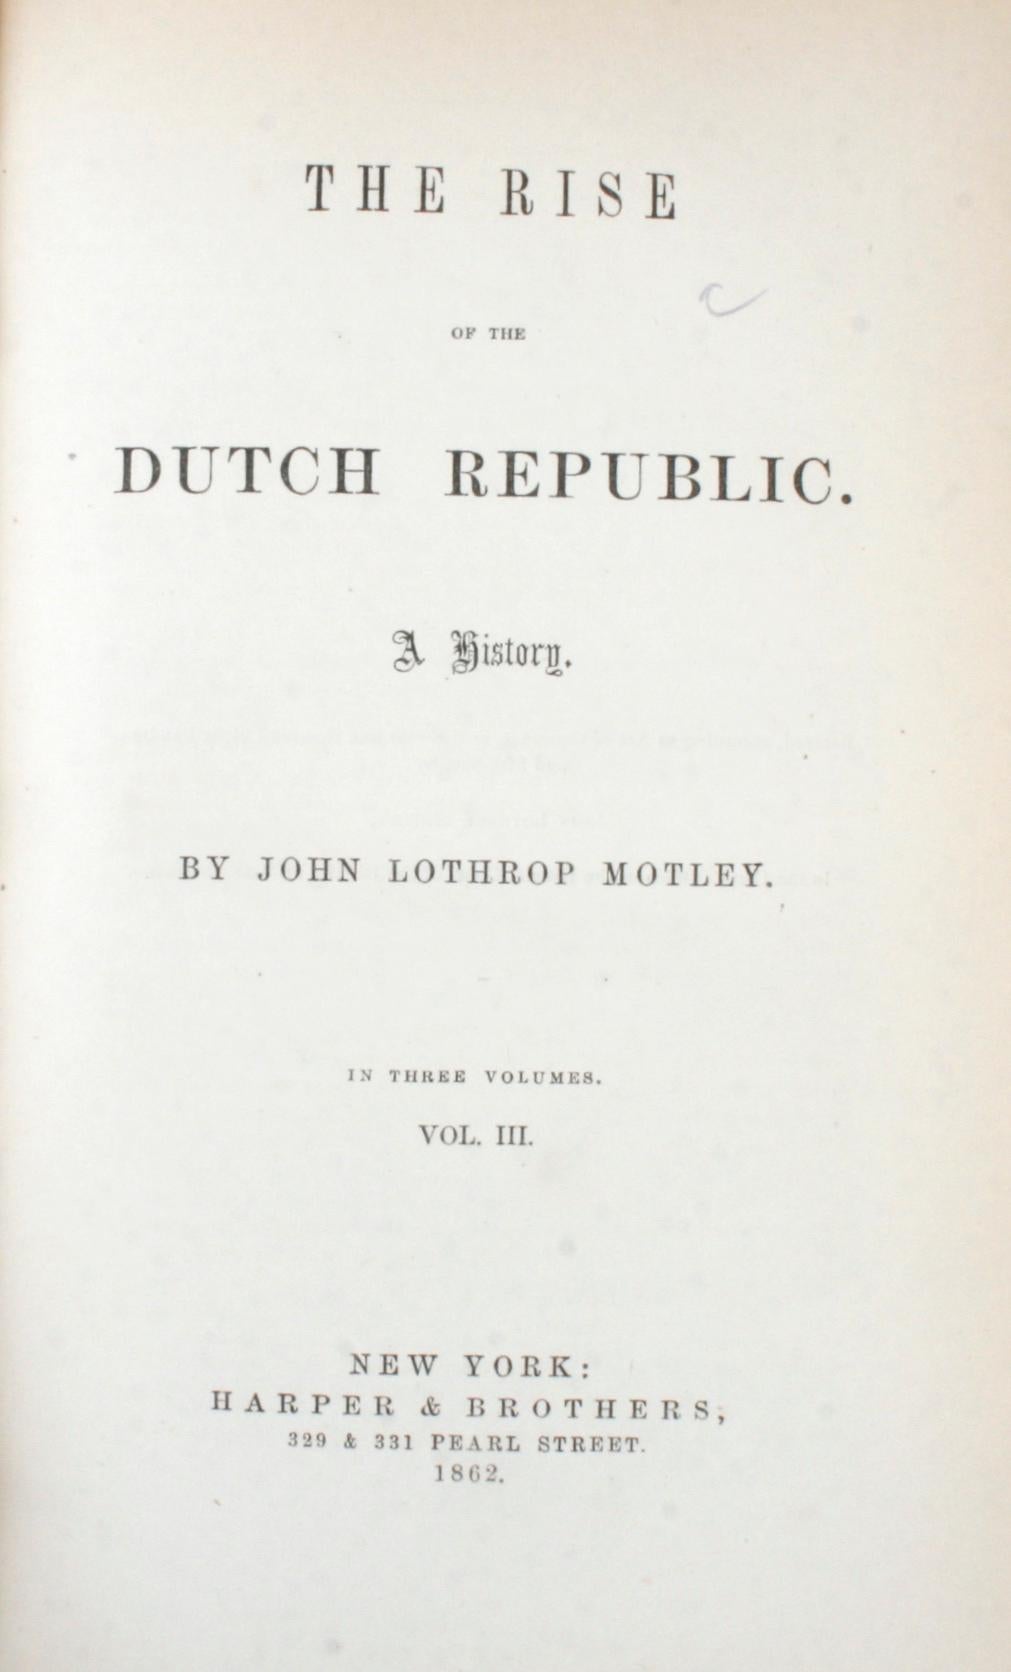 7 Volume Leather Bound Set, Dutch Republic and United Netherlands, First Edition 4